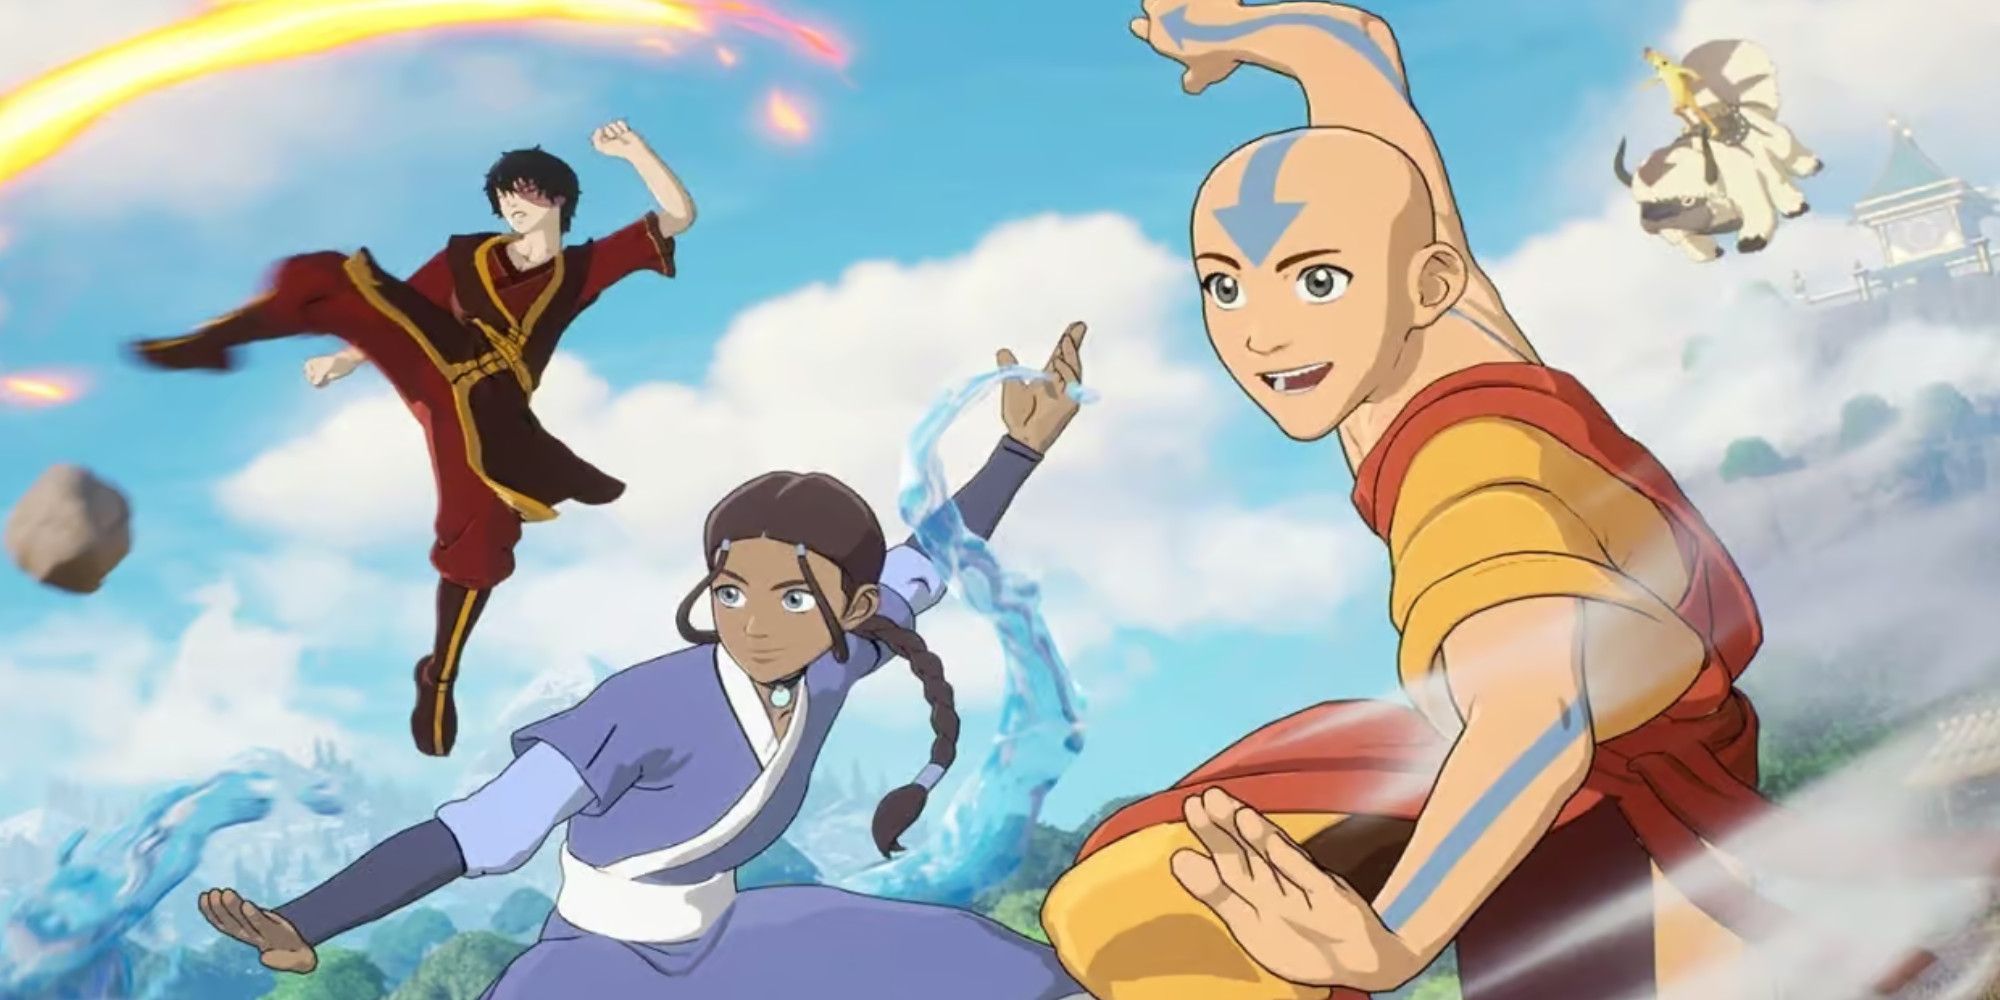 Aang, Zuko, and Katara from Avatar all bending with Peely flying Appa in the background